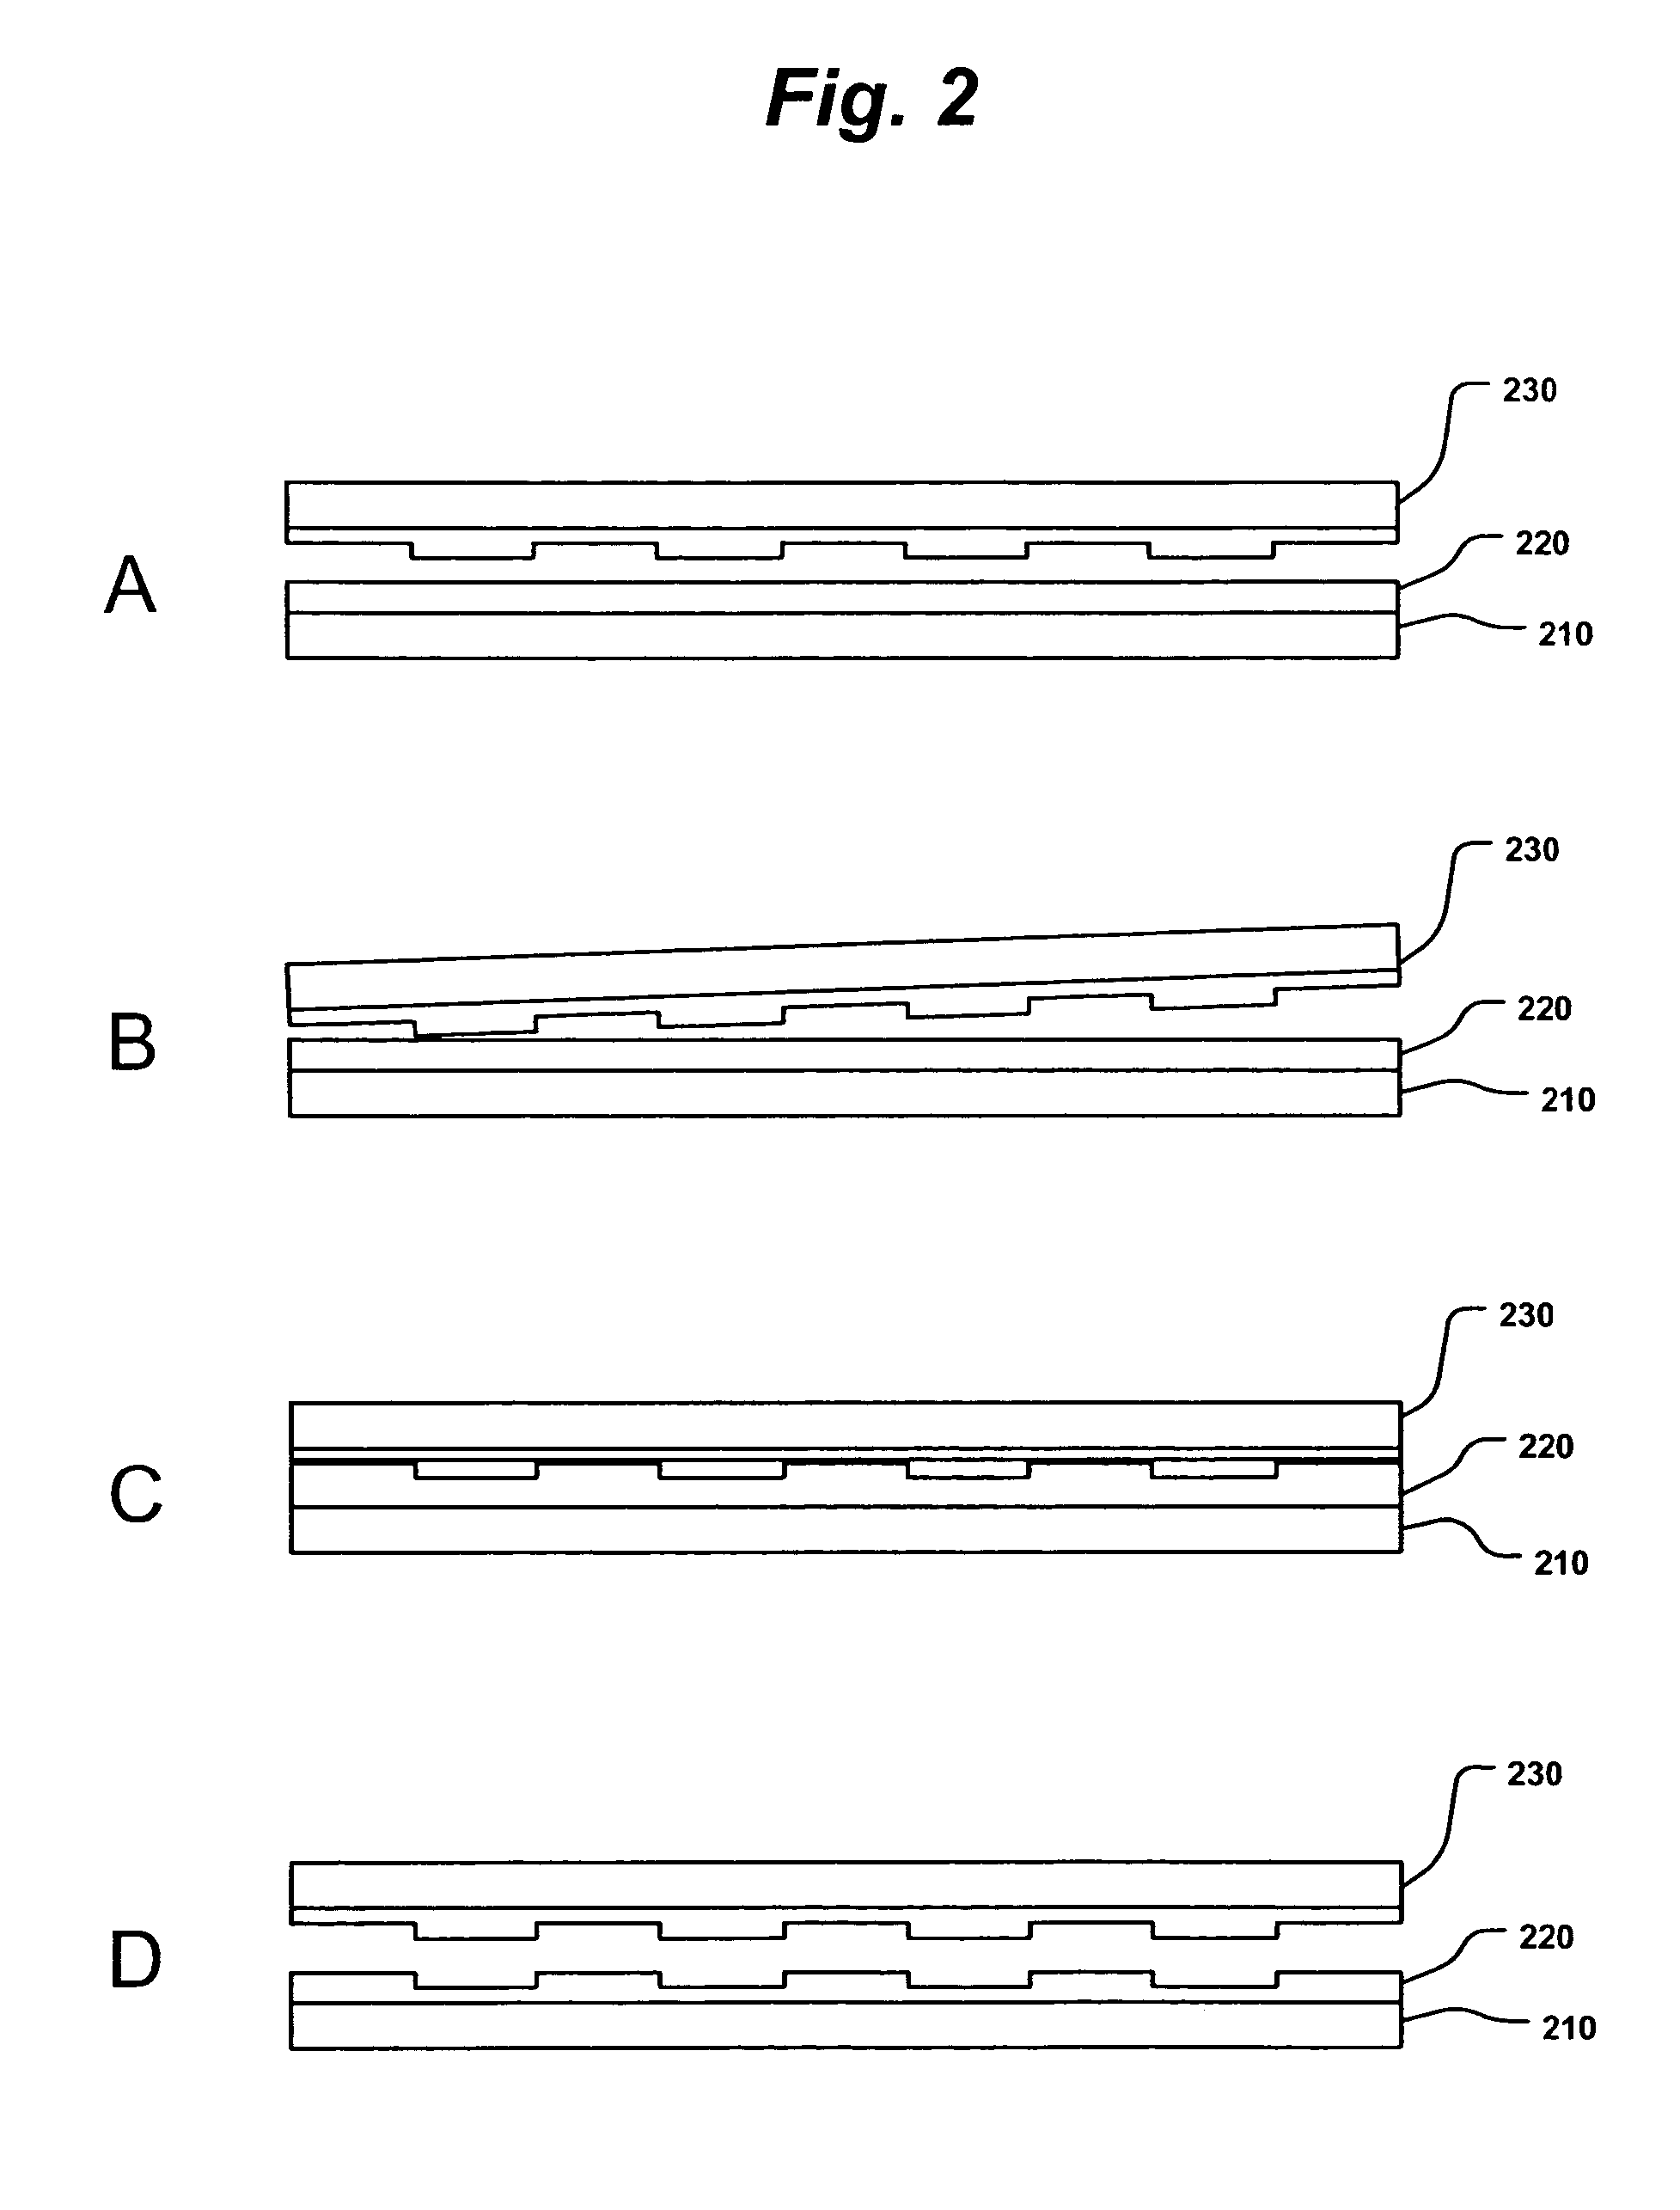 Sub-micron-scale patterning method and system